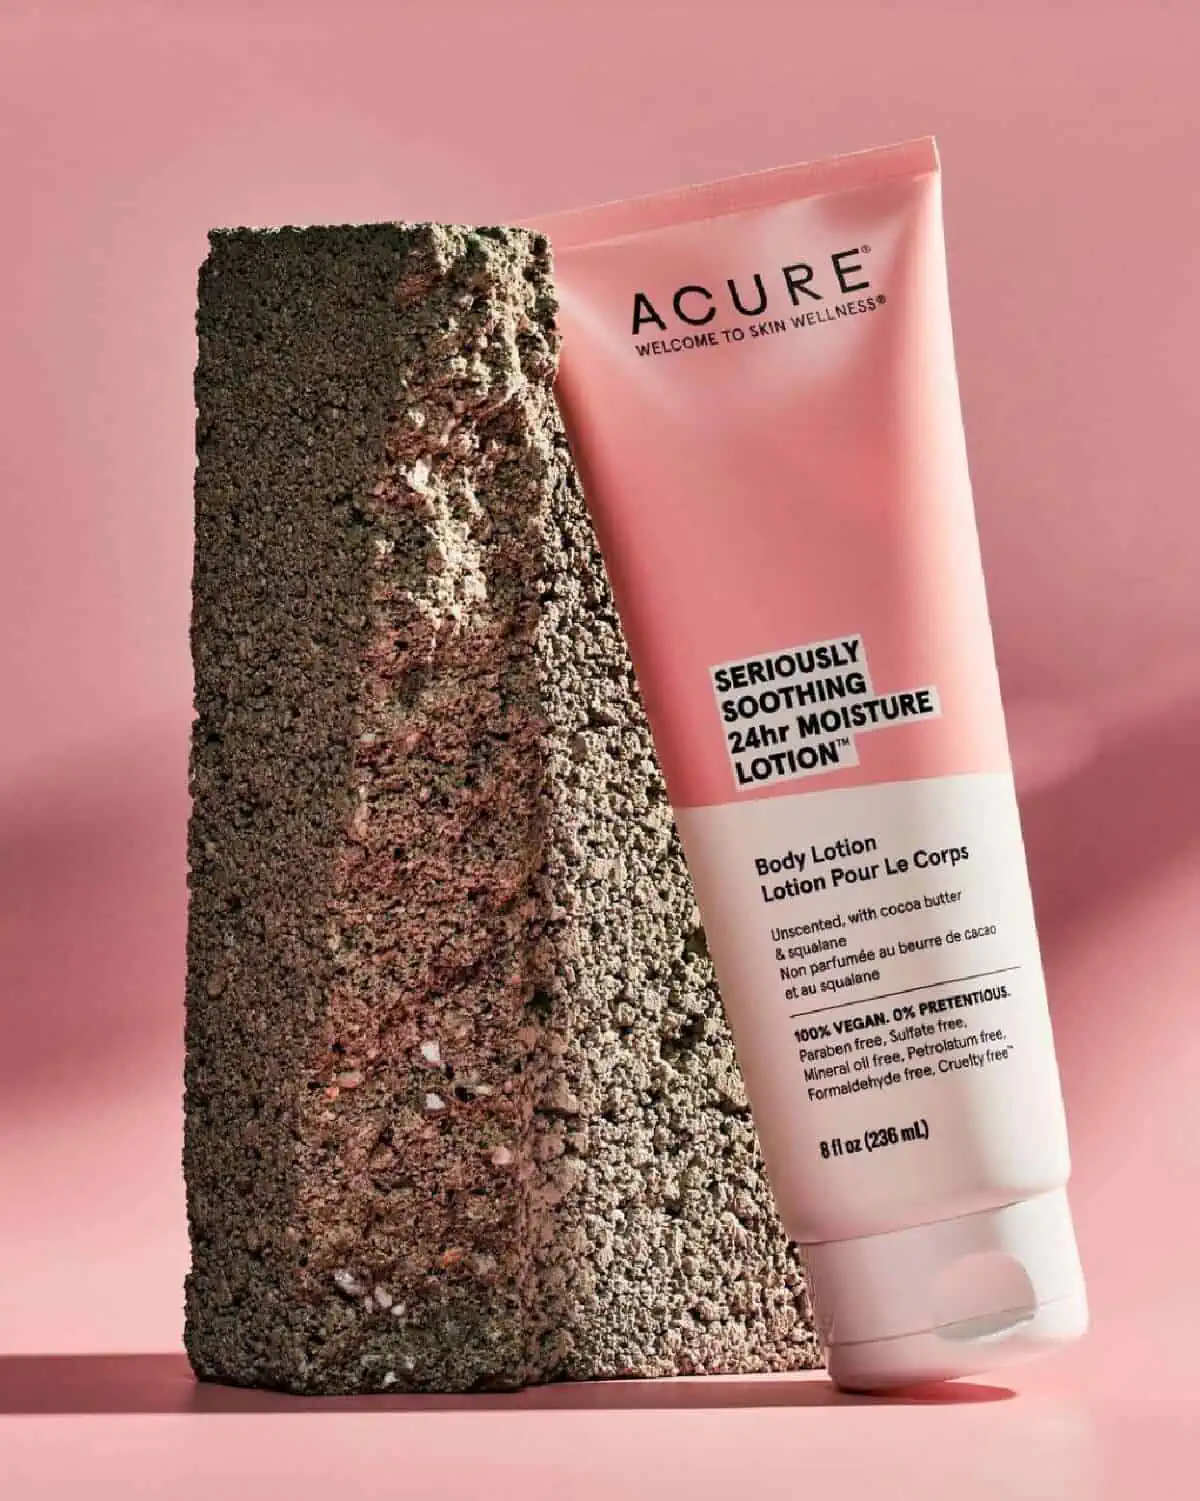 A pink and white tube of Acure body lotion laying against a large rough stone on a pink background.